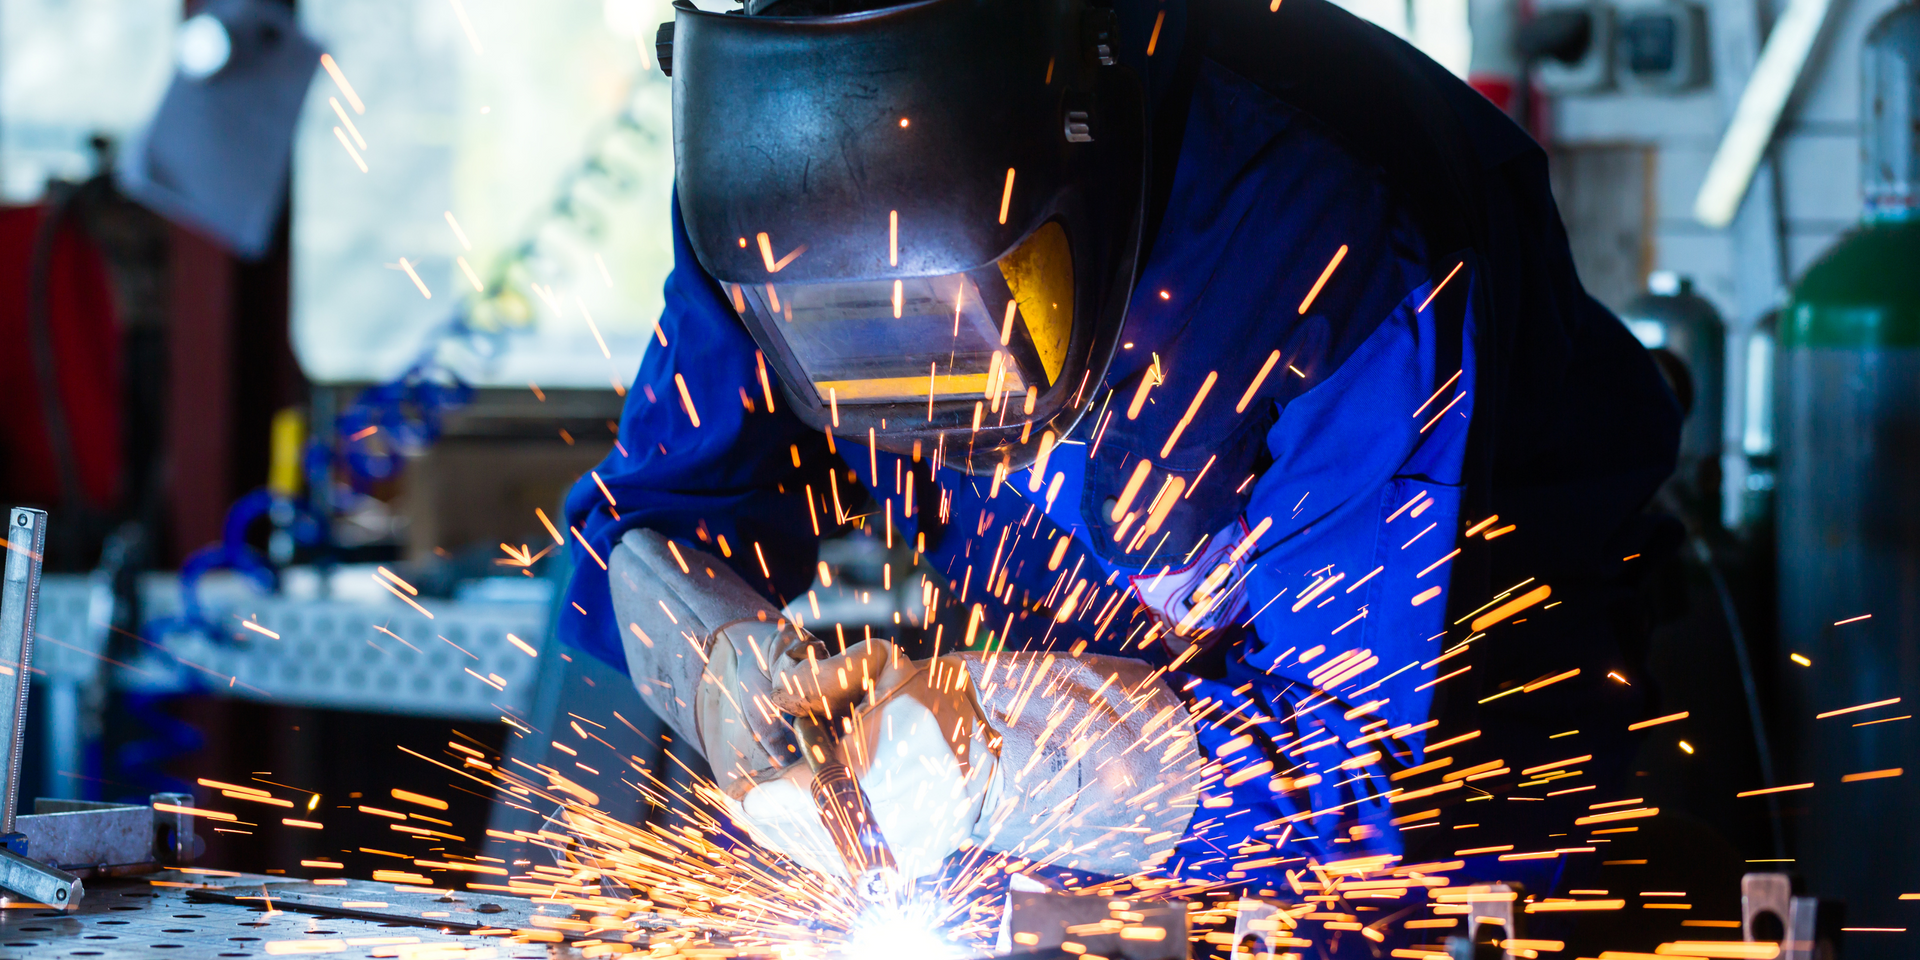 A man wearing a dark blue jumpsuit and safety helmet welding a piece of metal in a factory.